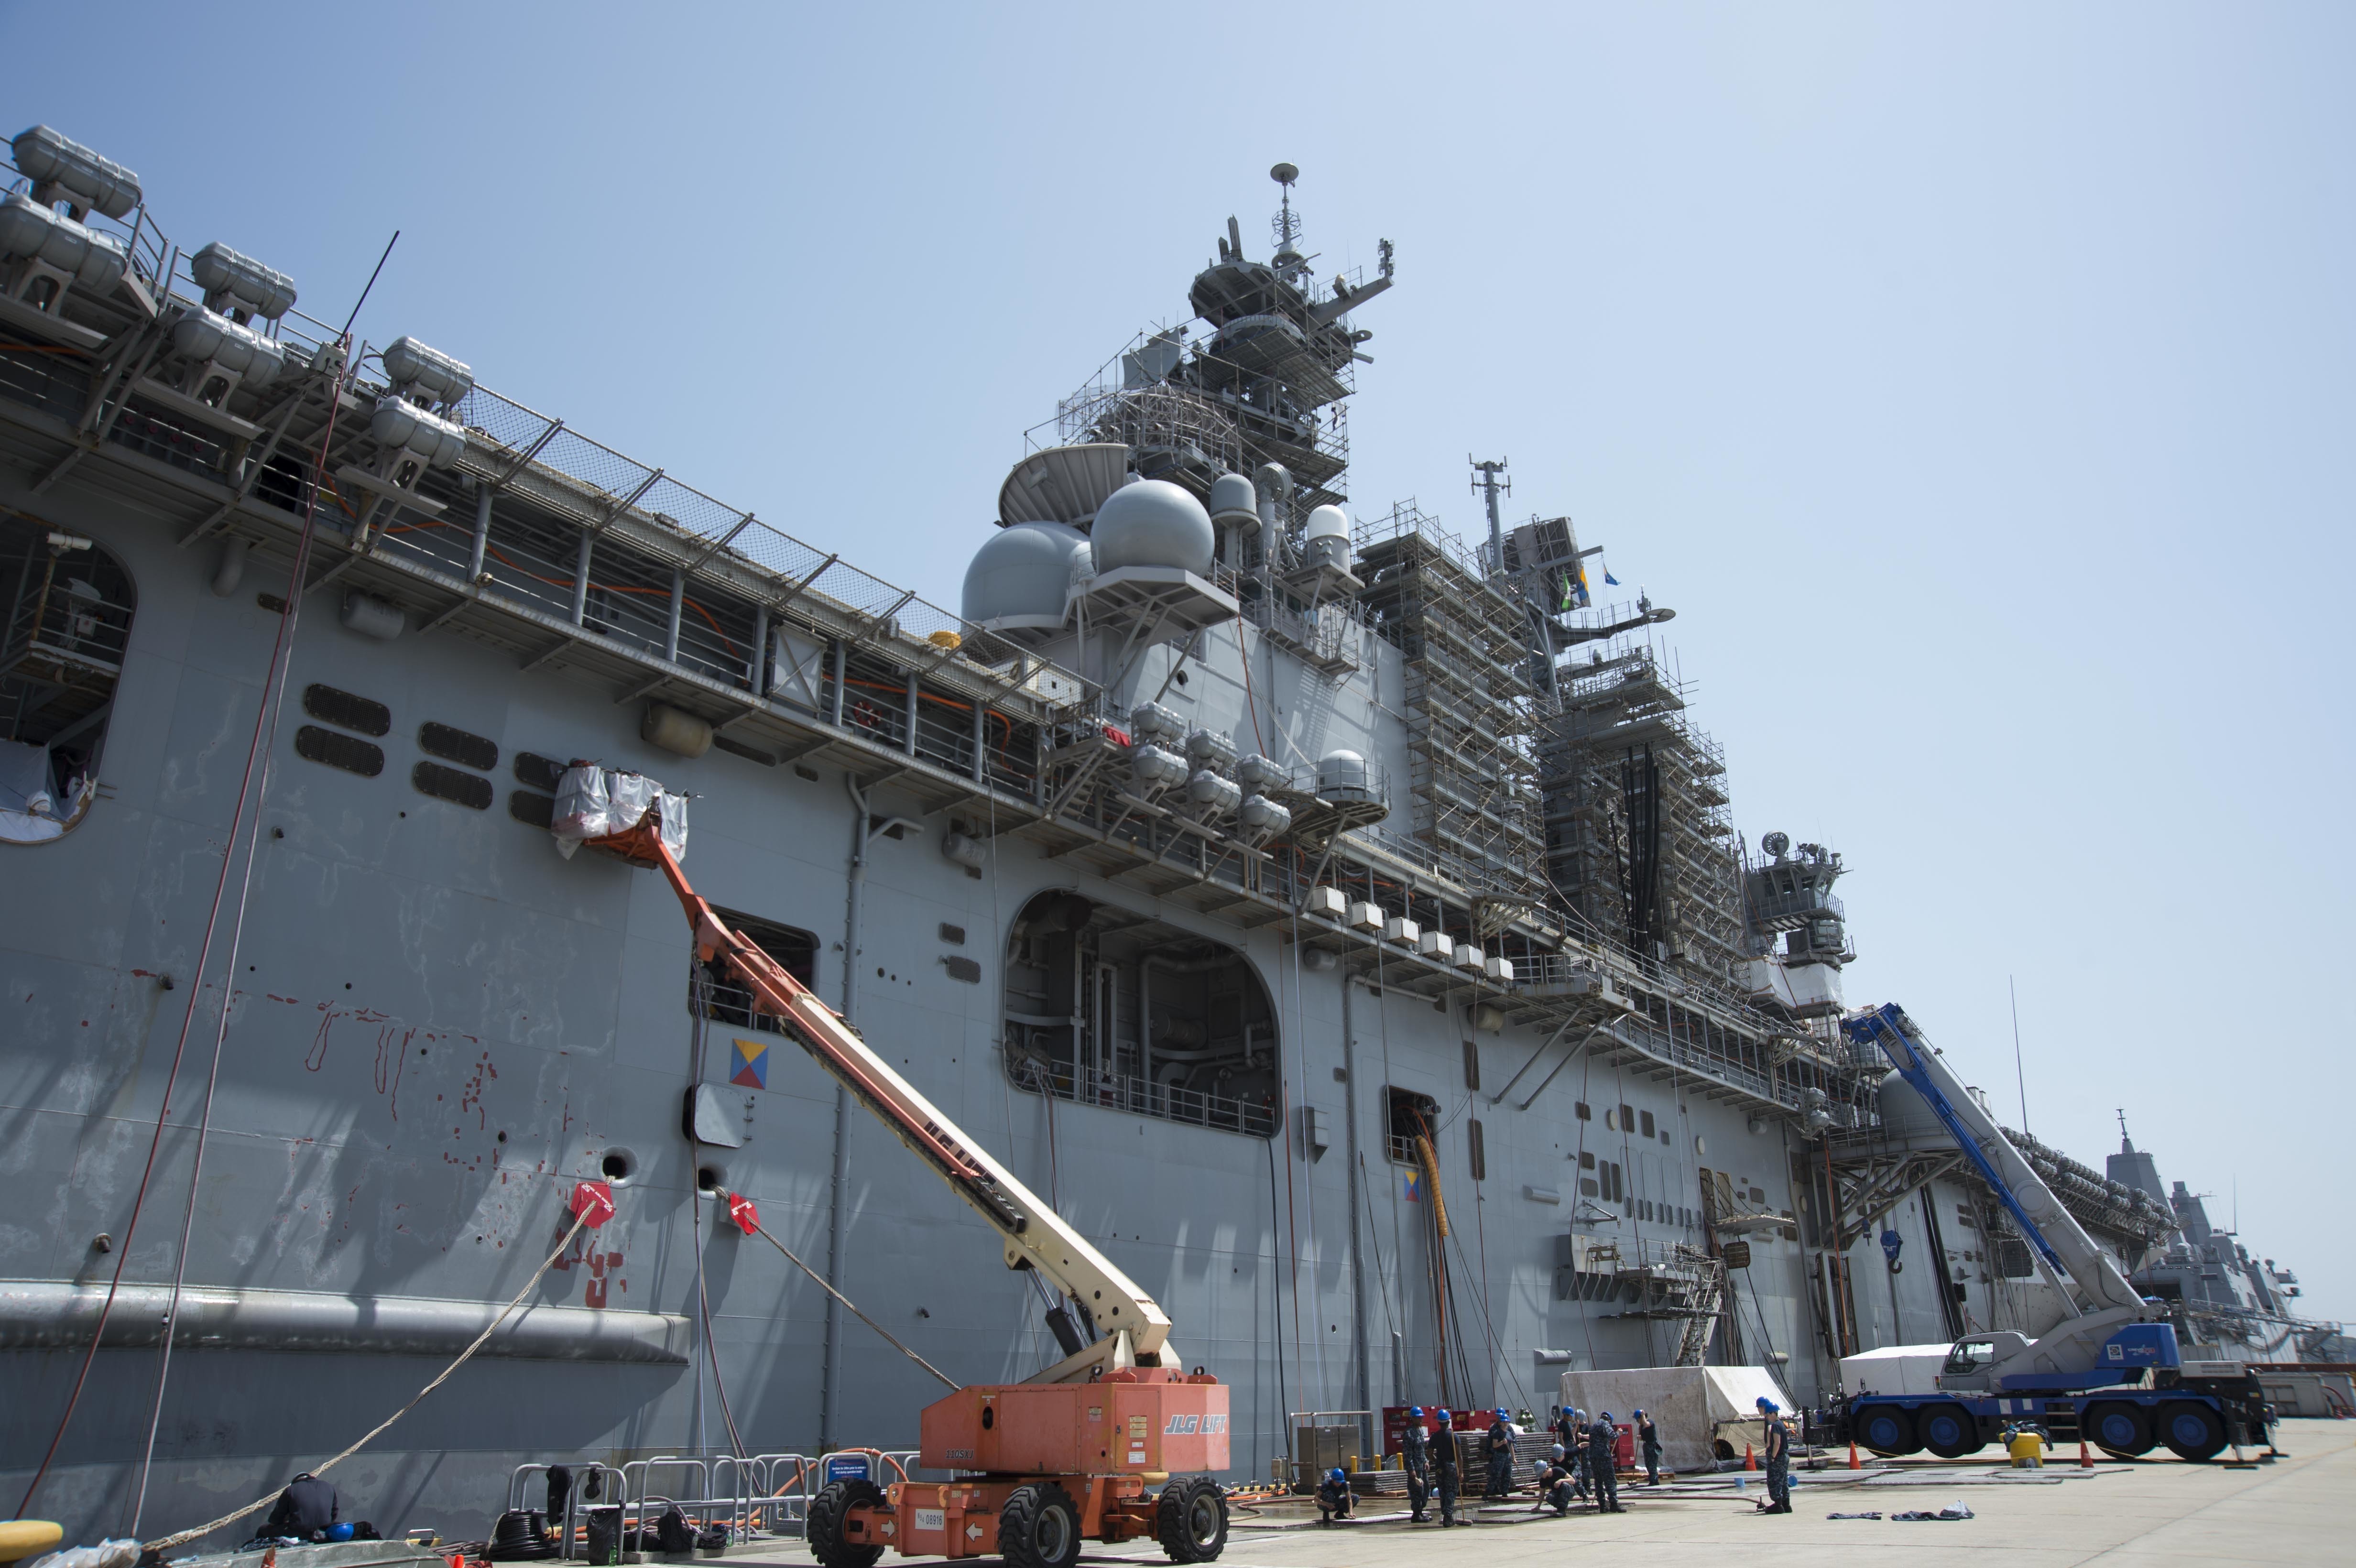 Sailors assigned to amphibious assault ship USS Bonhomme Richard (LHD 6) conduct maintenance during a ship's restricted availability (SRA) period in Sasebo on April 14, 2016. US Navy photo.